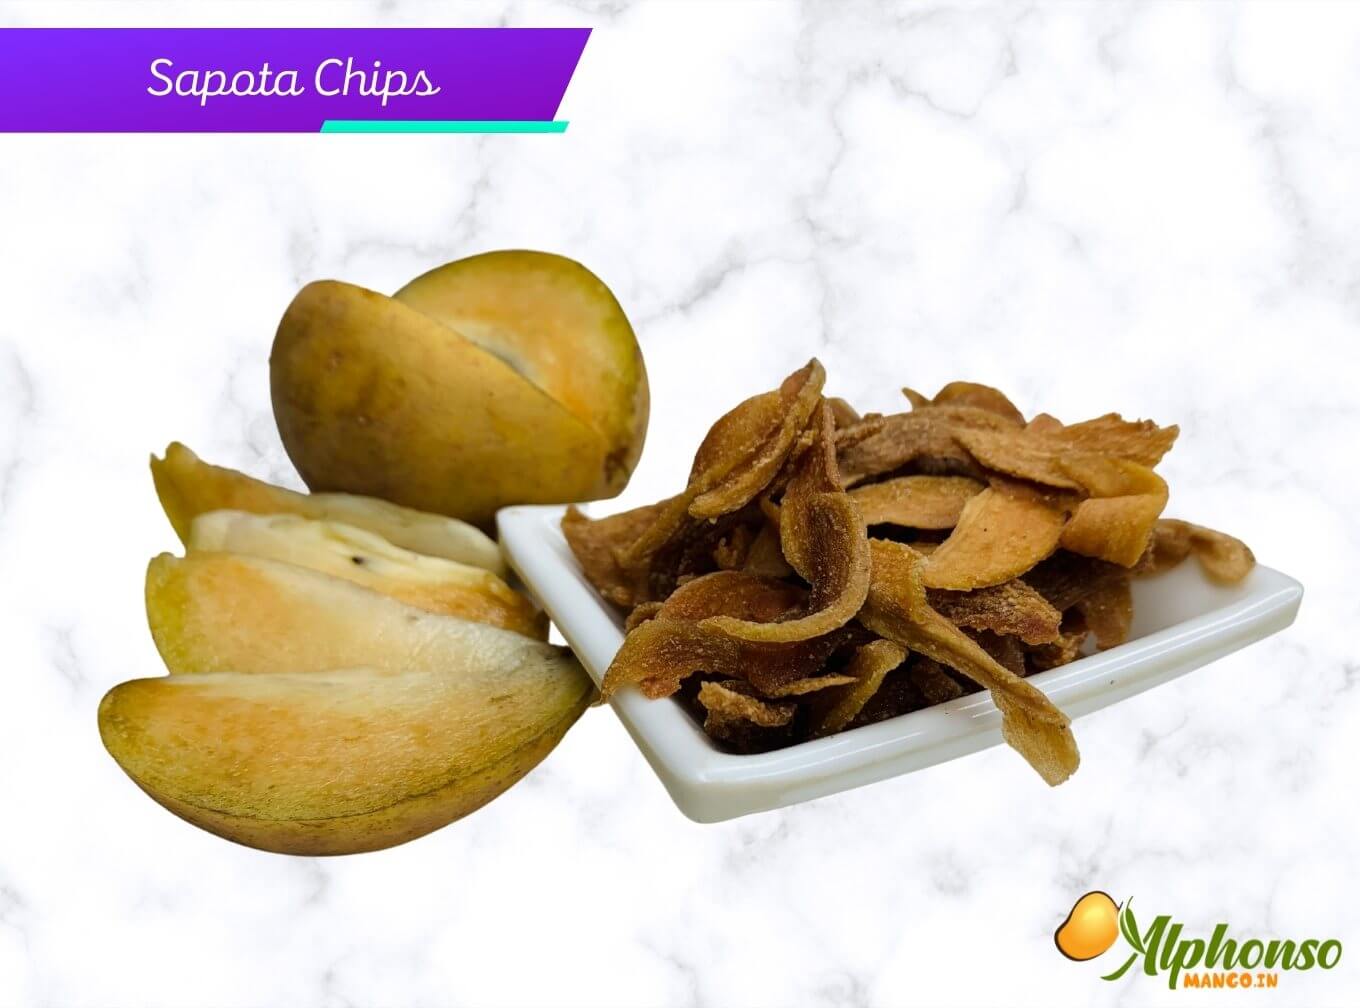 Dried Chikoo Chips